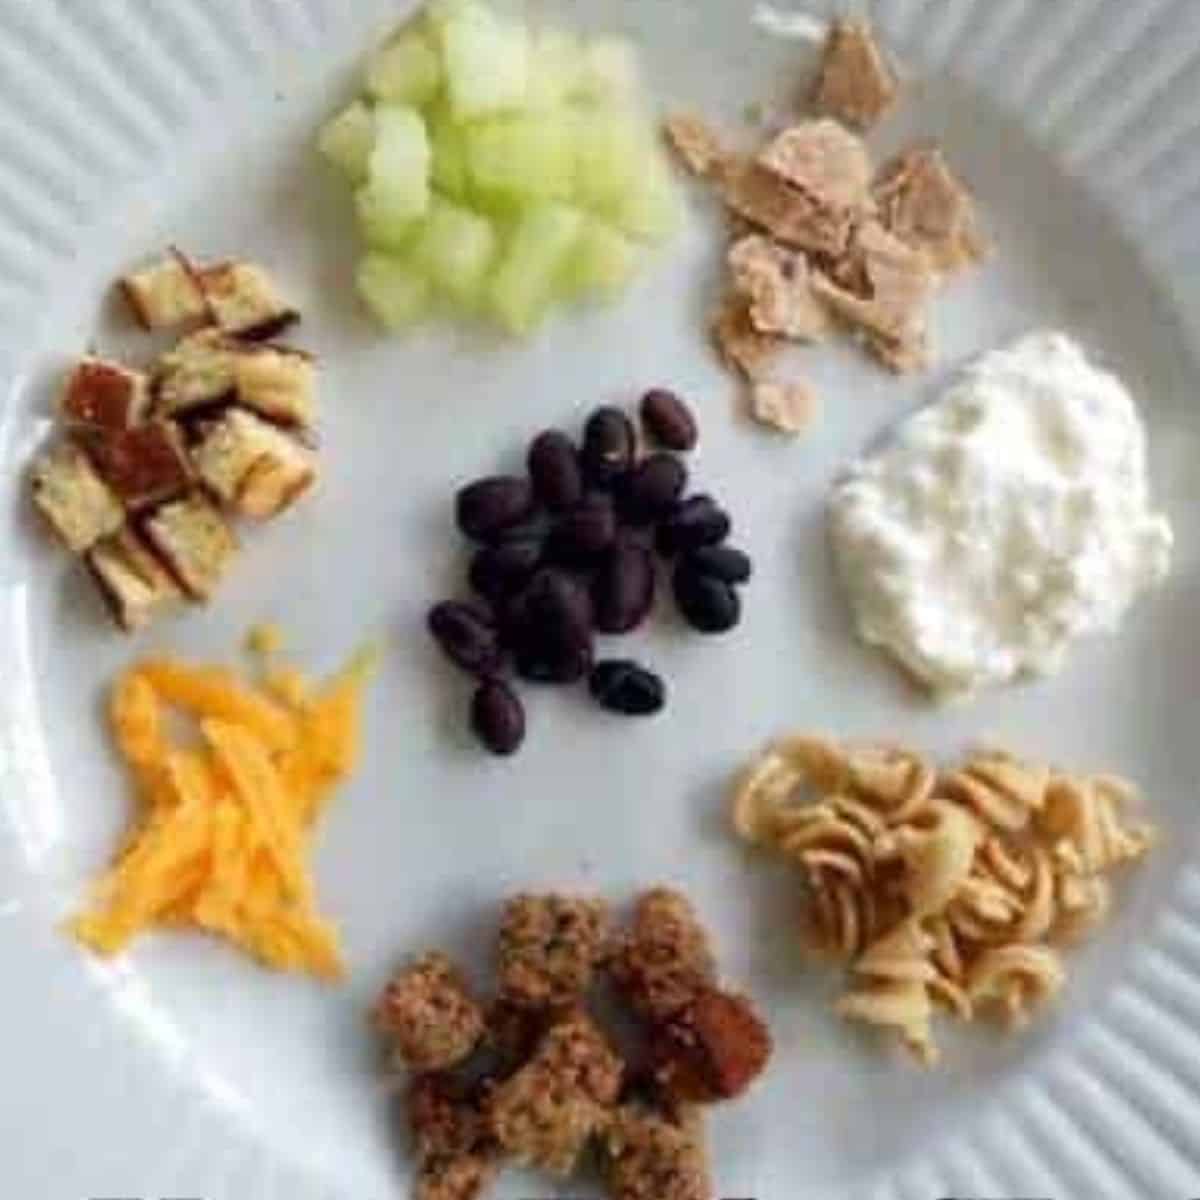 Mega List of Table Foods for Your Baby or Toddler